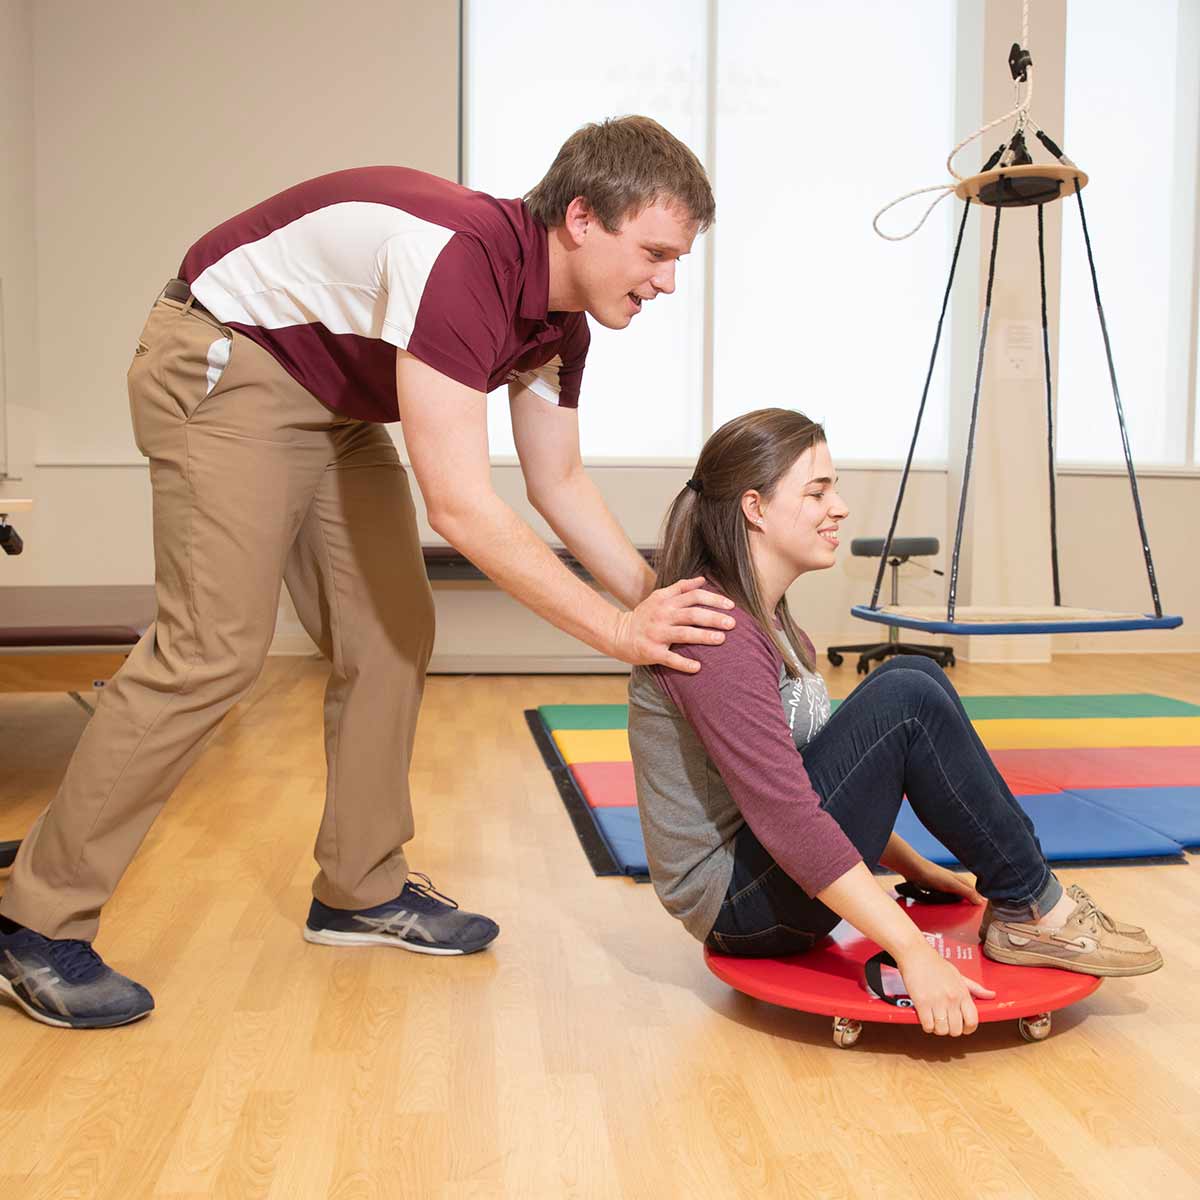 Two occupational therapy students having fun in a lab. One student is pushing another sitting who is sitting down on a circular roller.